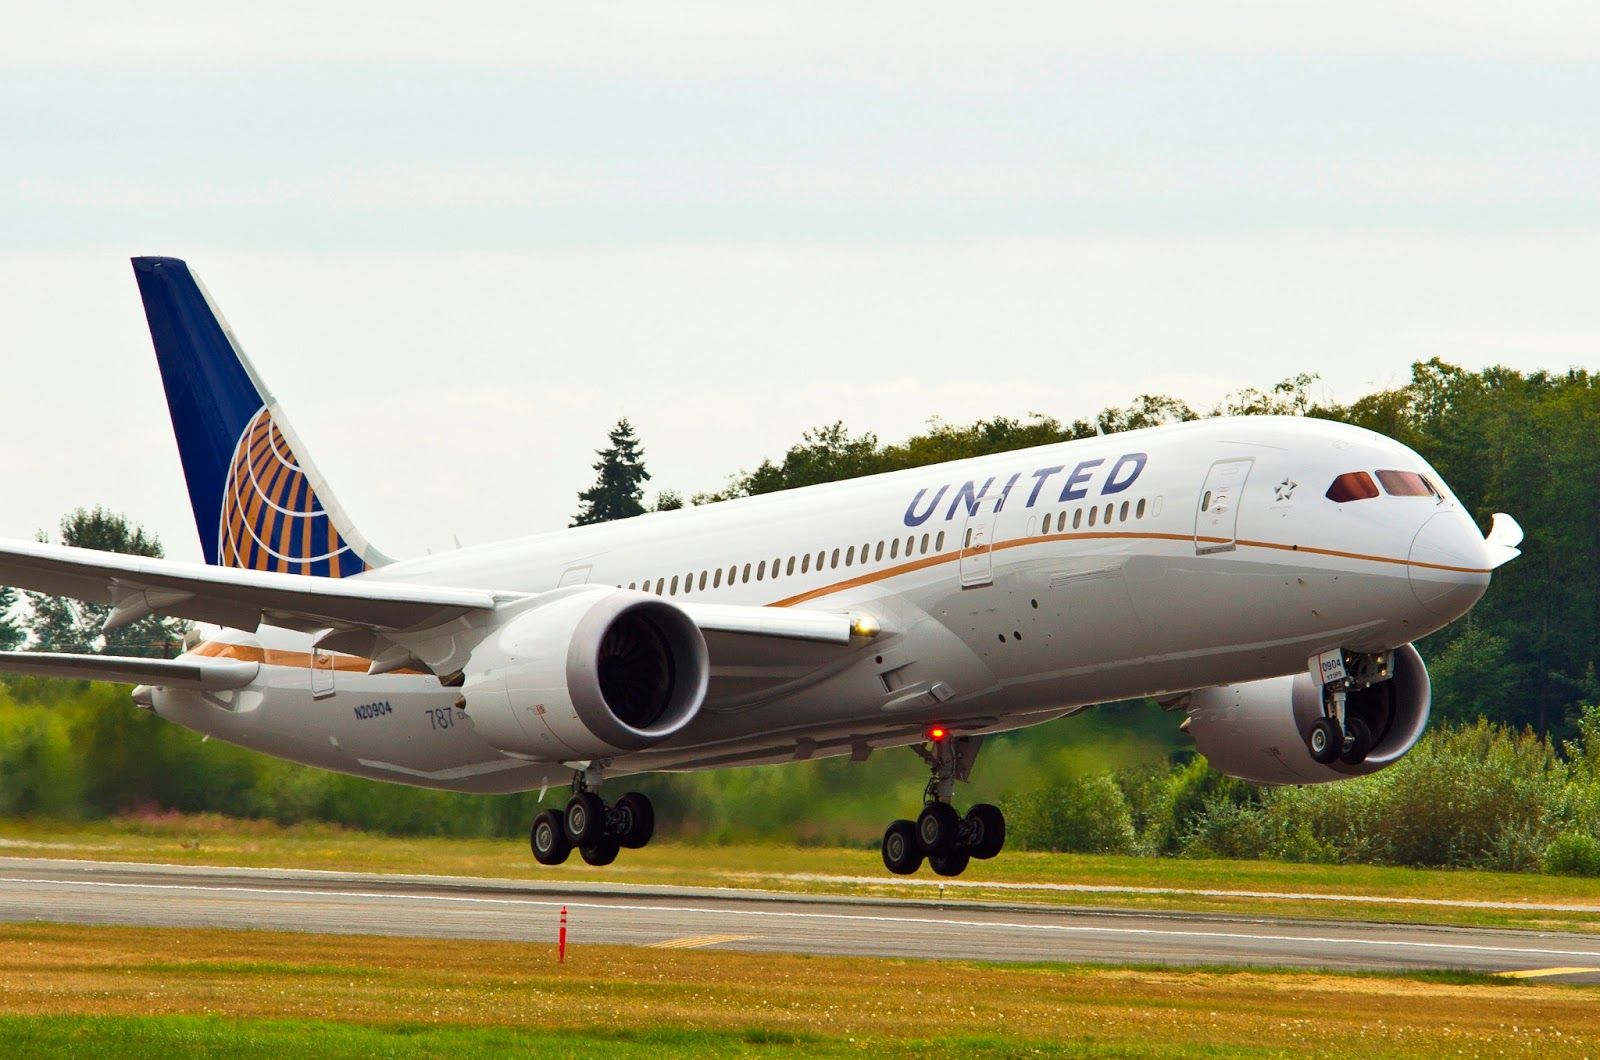 Boeing 787 Dreamliner of United Airlines Landing Phase Aircraft